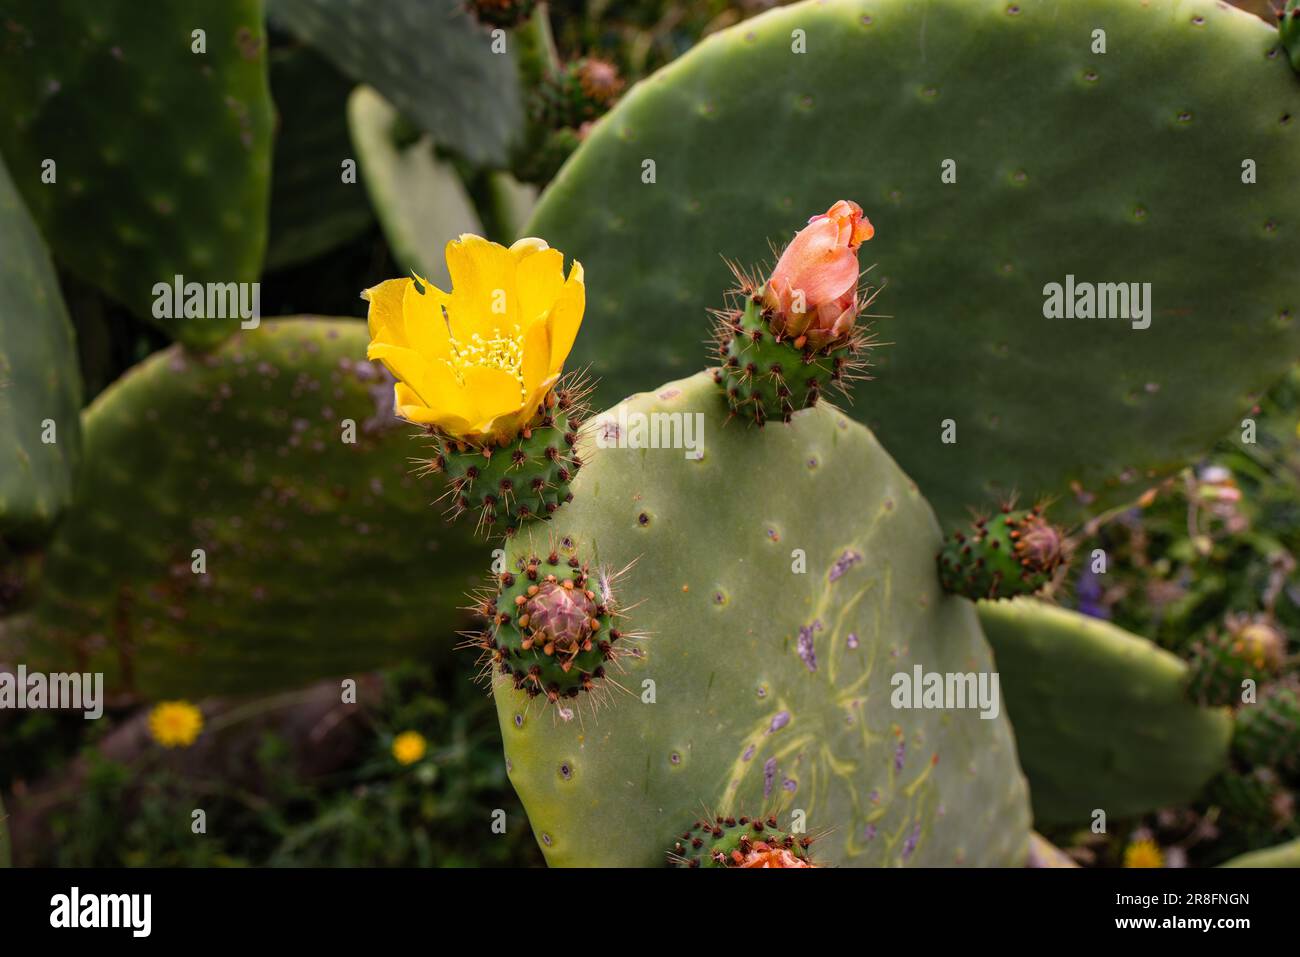 A close-up of a prickly cactus with yellow flowers surrounded by lush green foliage Stock Photo